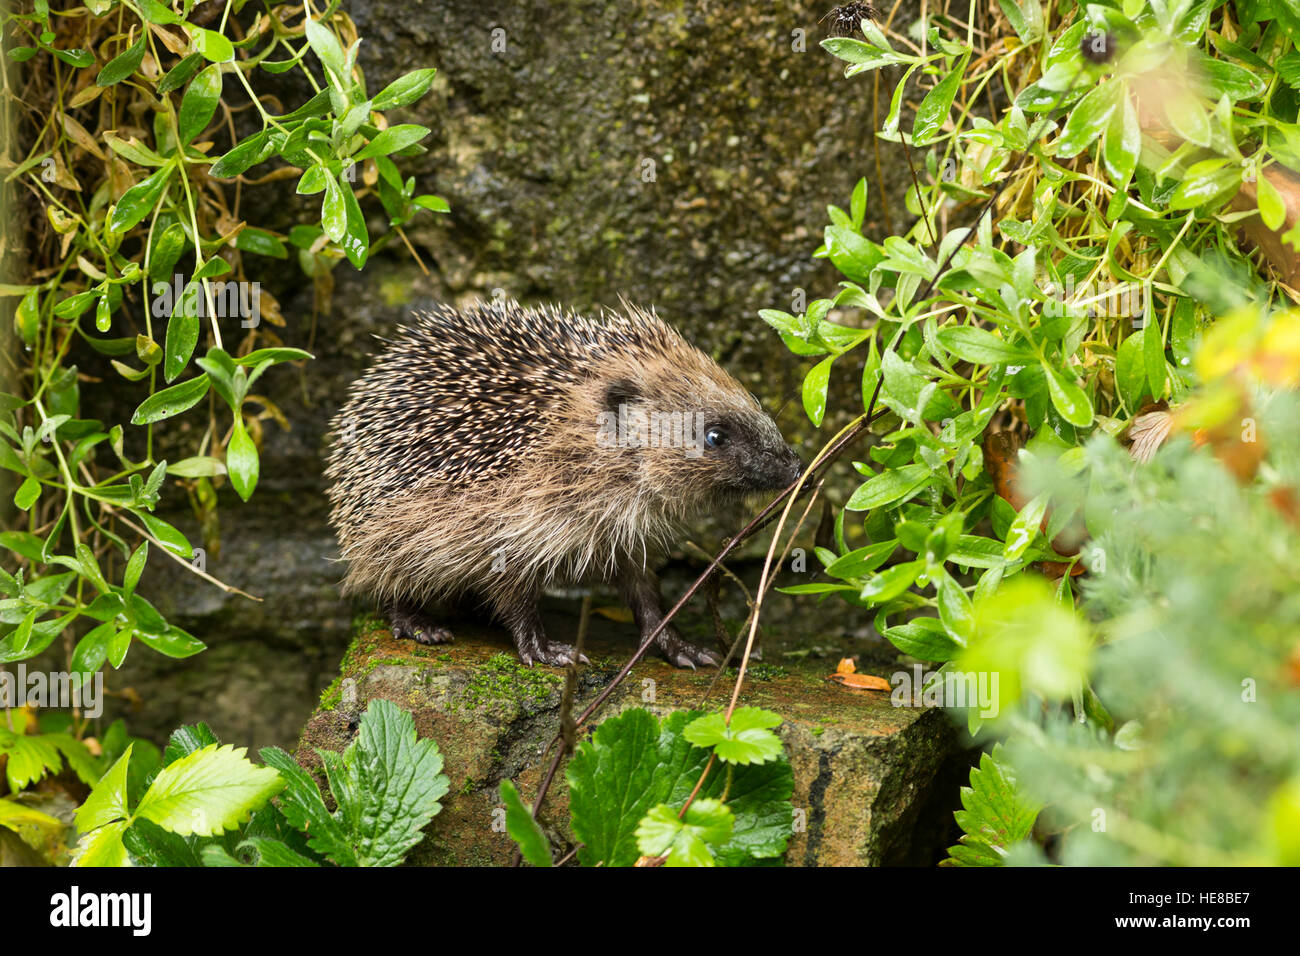 young juvenile hedgehog in undergrowth Stock Photo